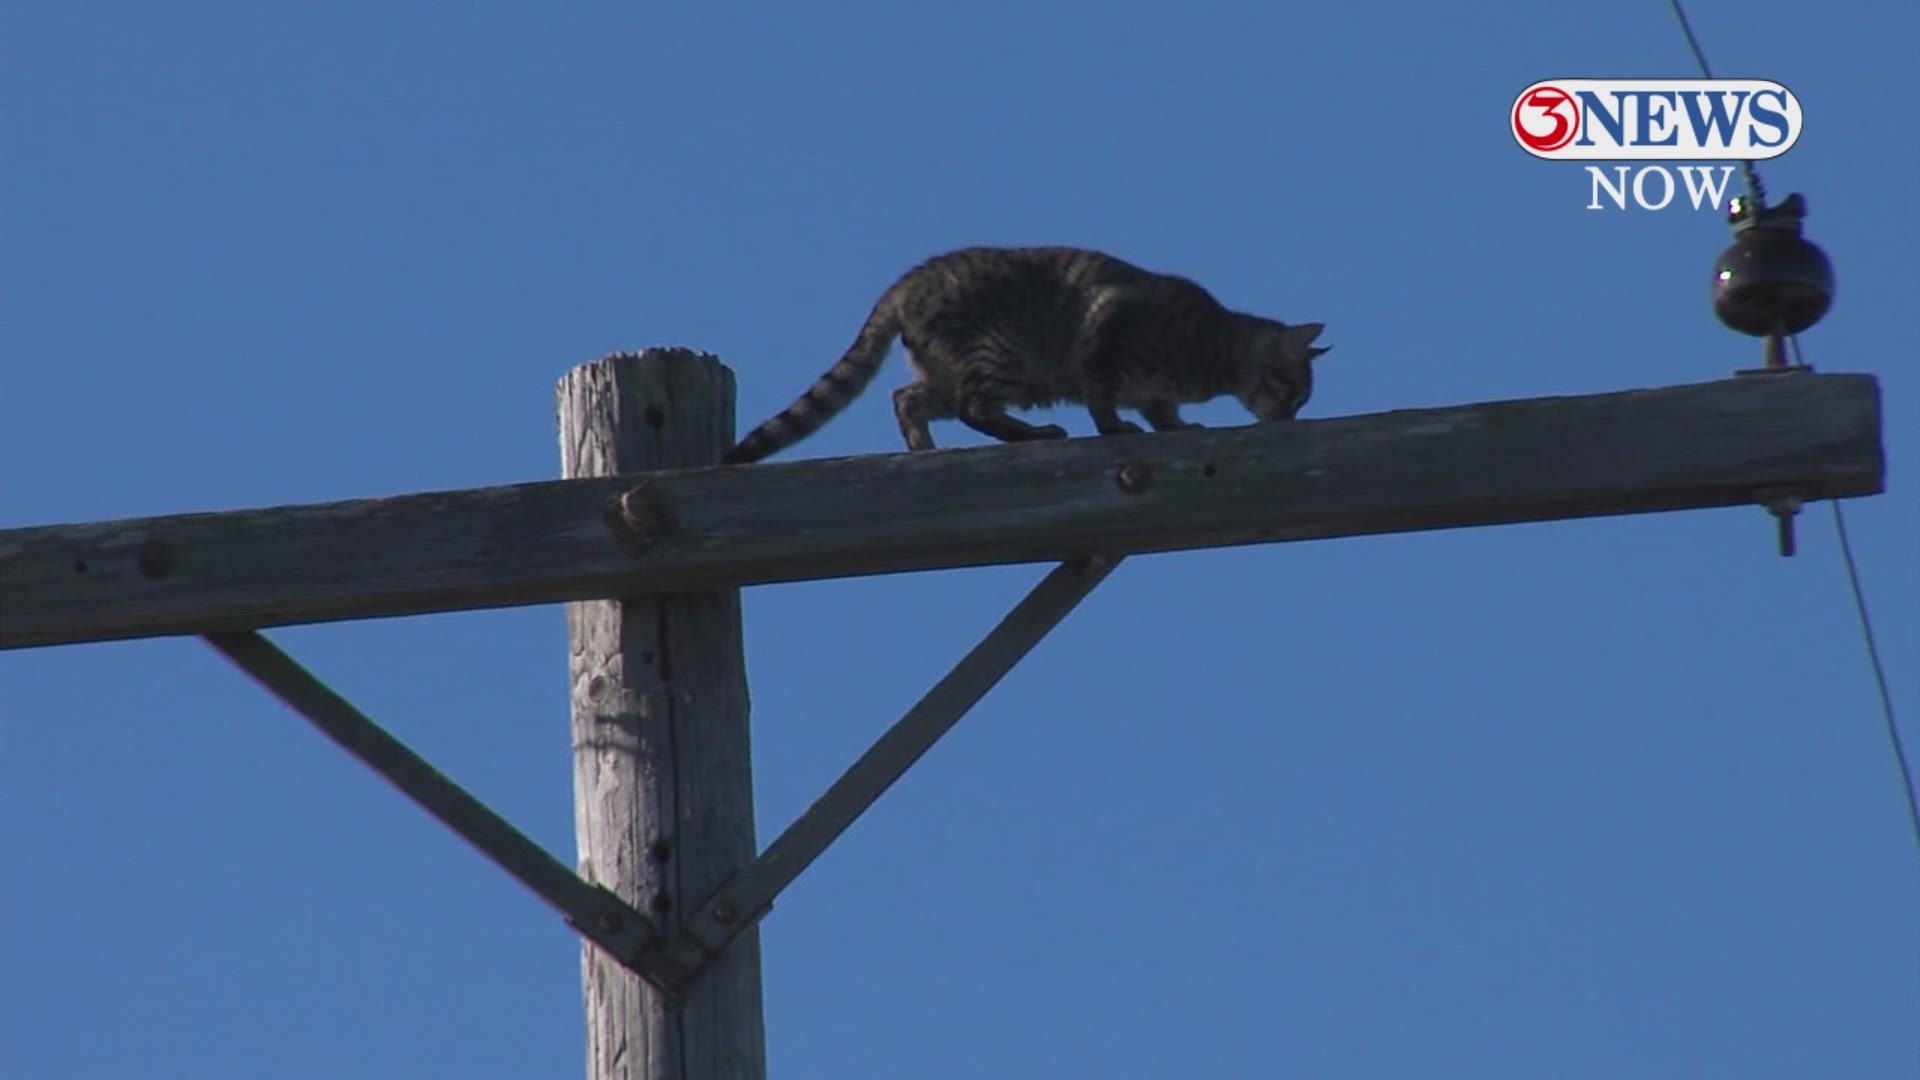 Coco: N.L. tabby cat's leap off utility pole goes viral